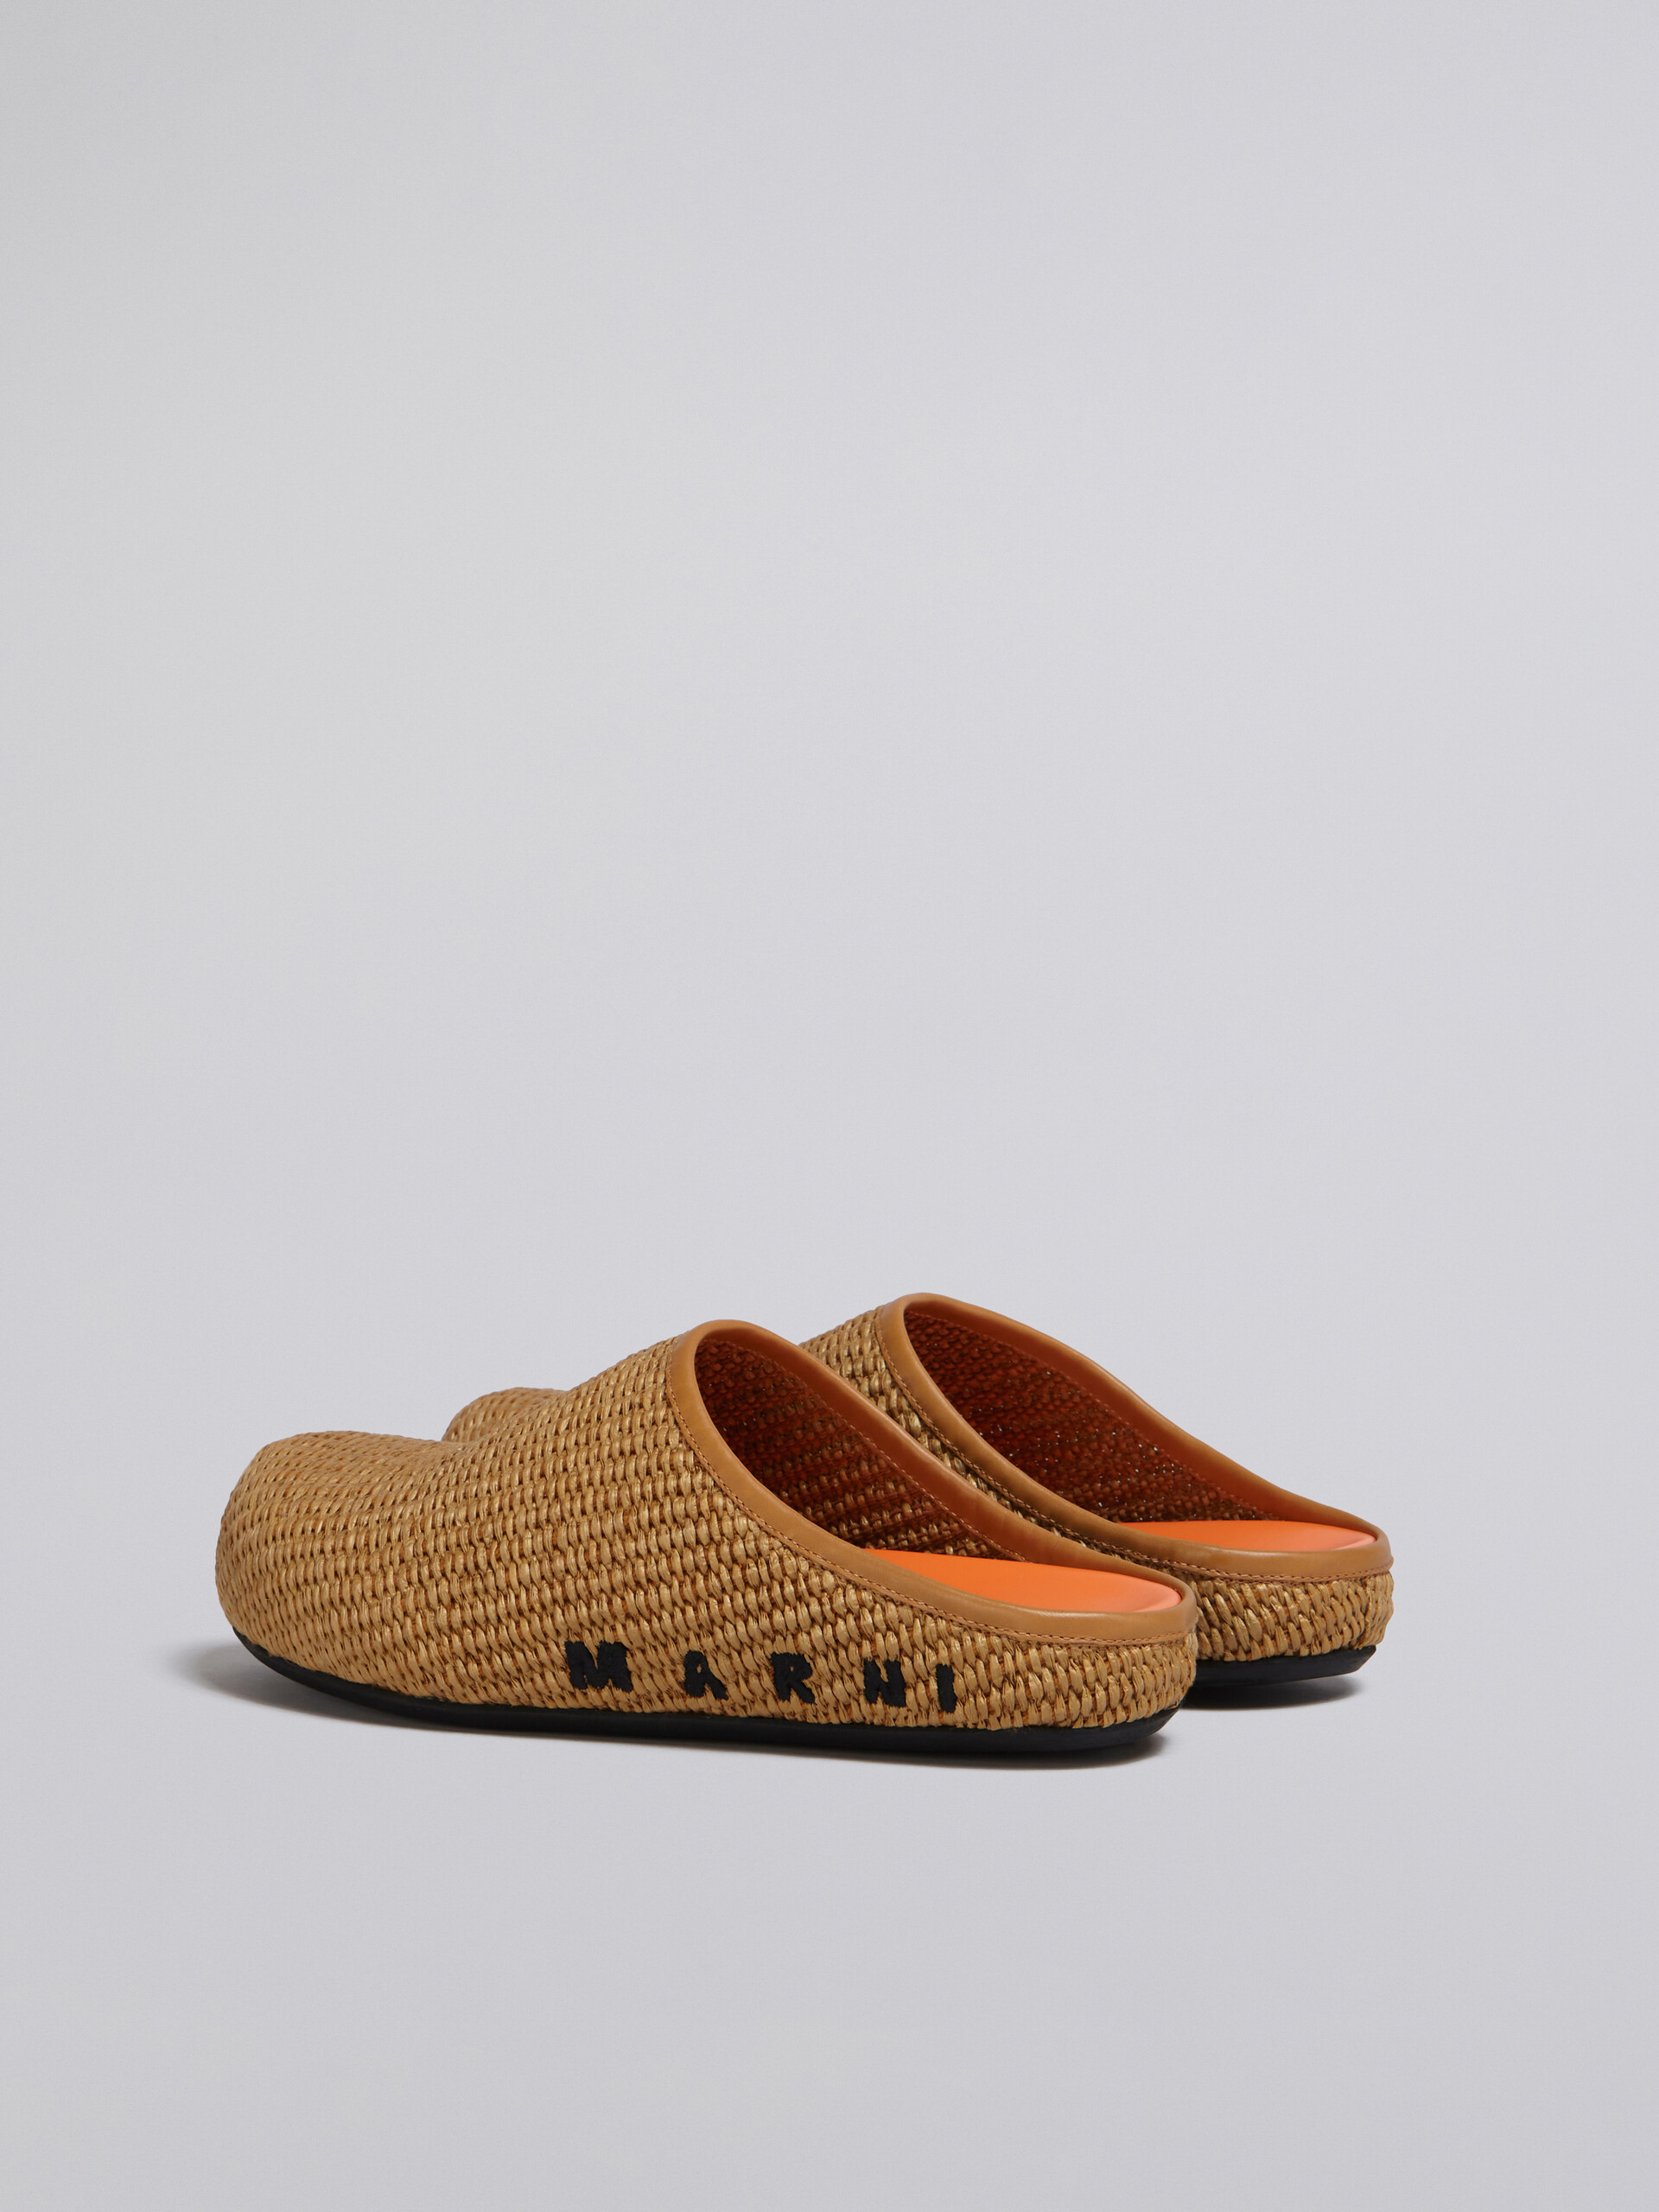 Brown raffia and leather Fussbett sabot - Clogs - Image 3